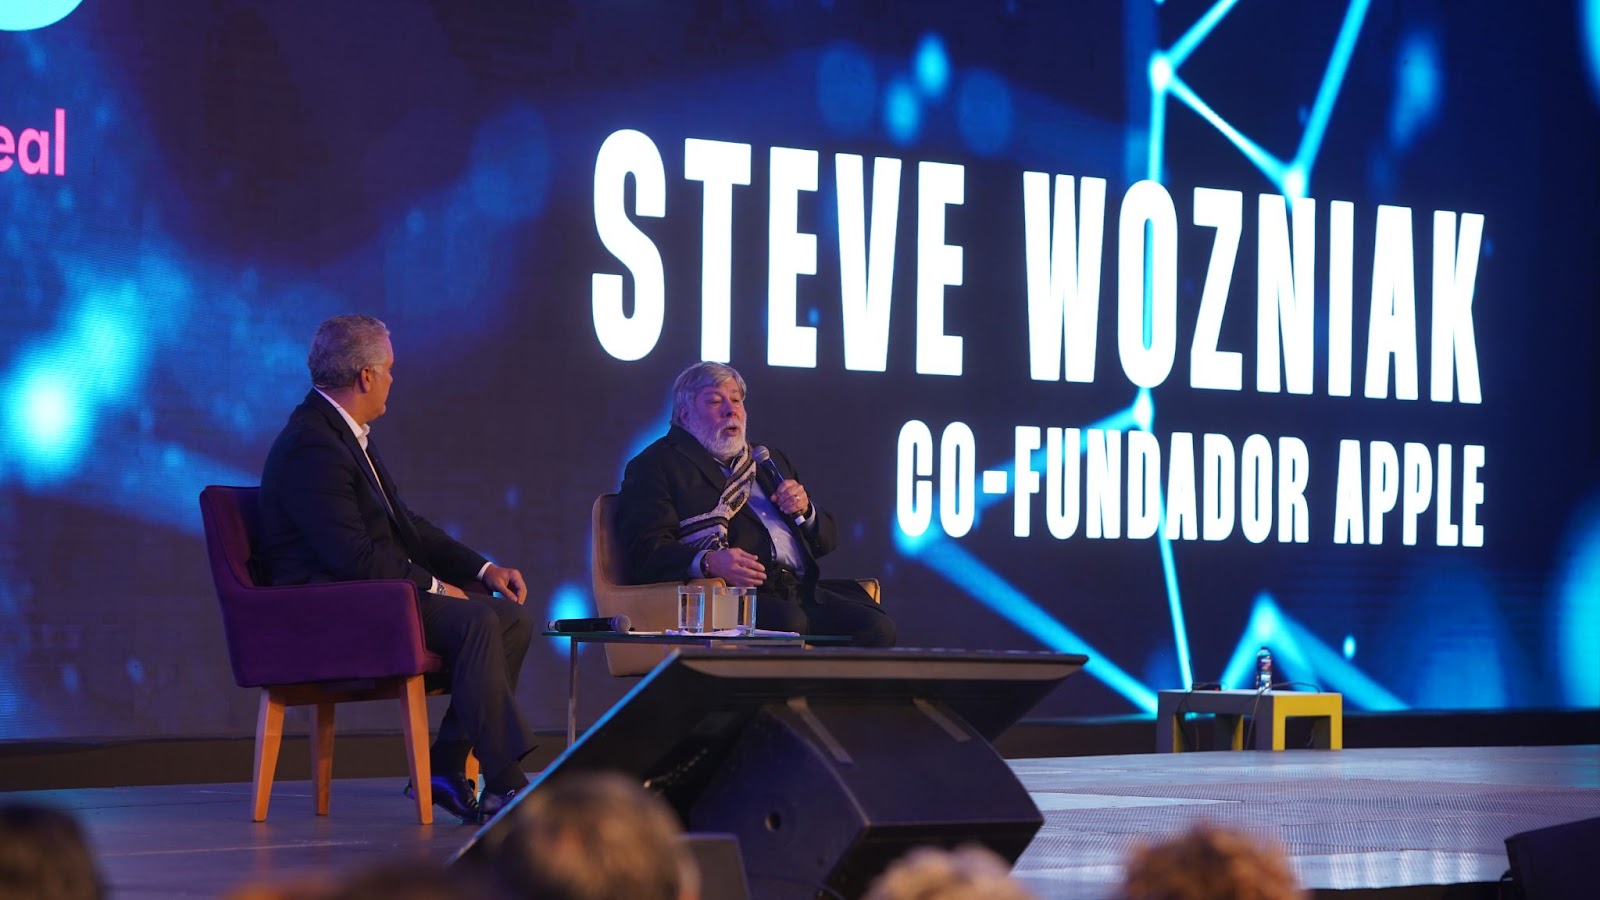 Ivan Duque and Steve Wozniak in Colombia 4.0 Summit